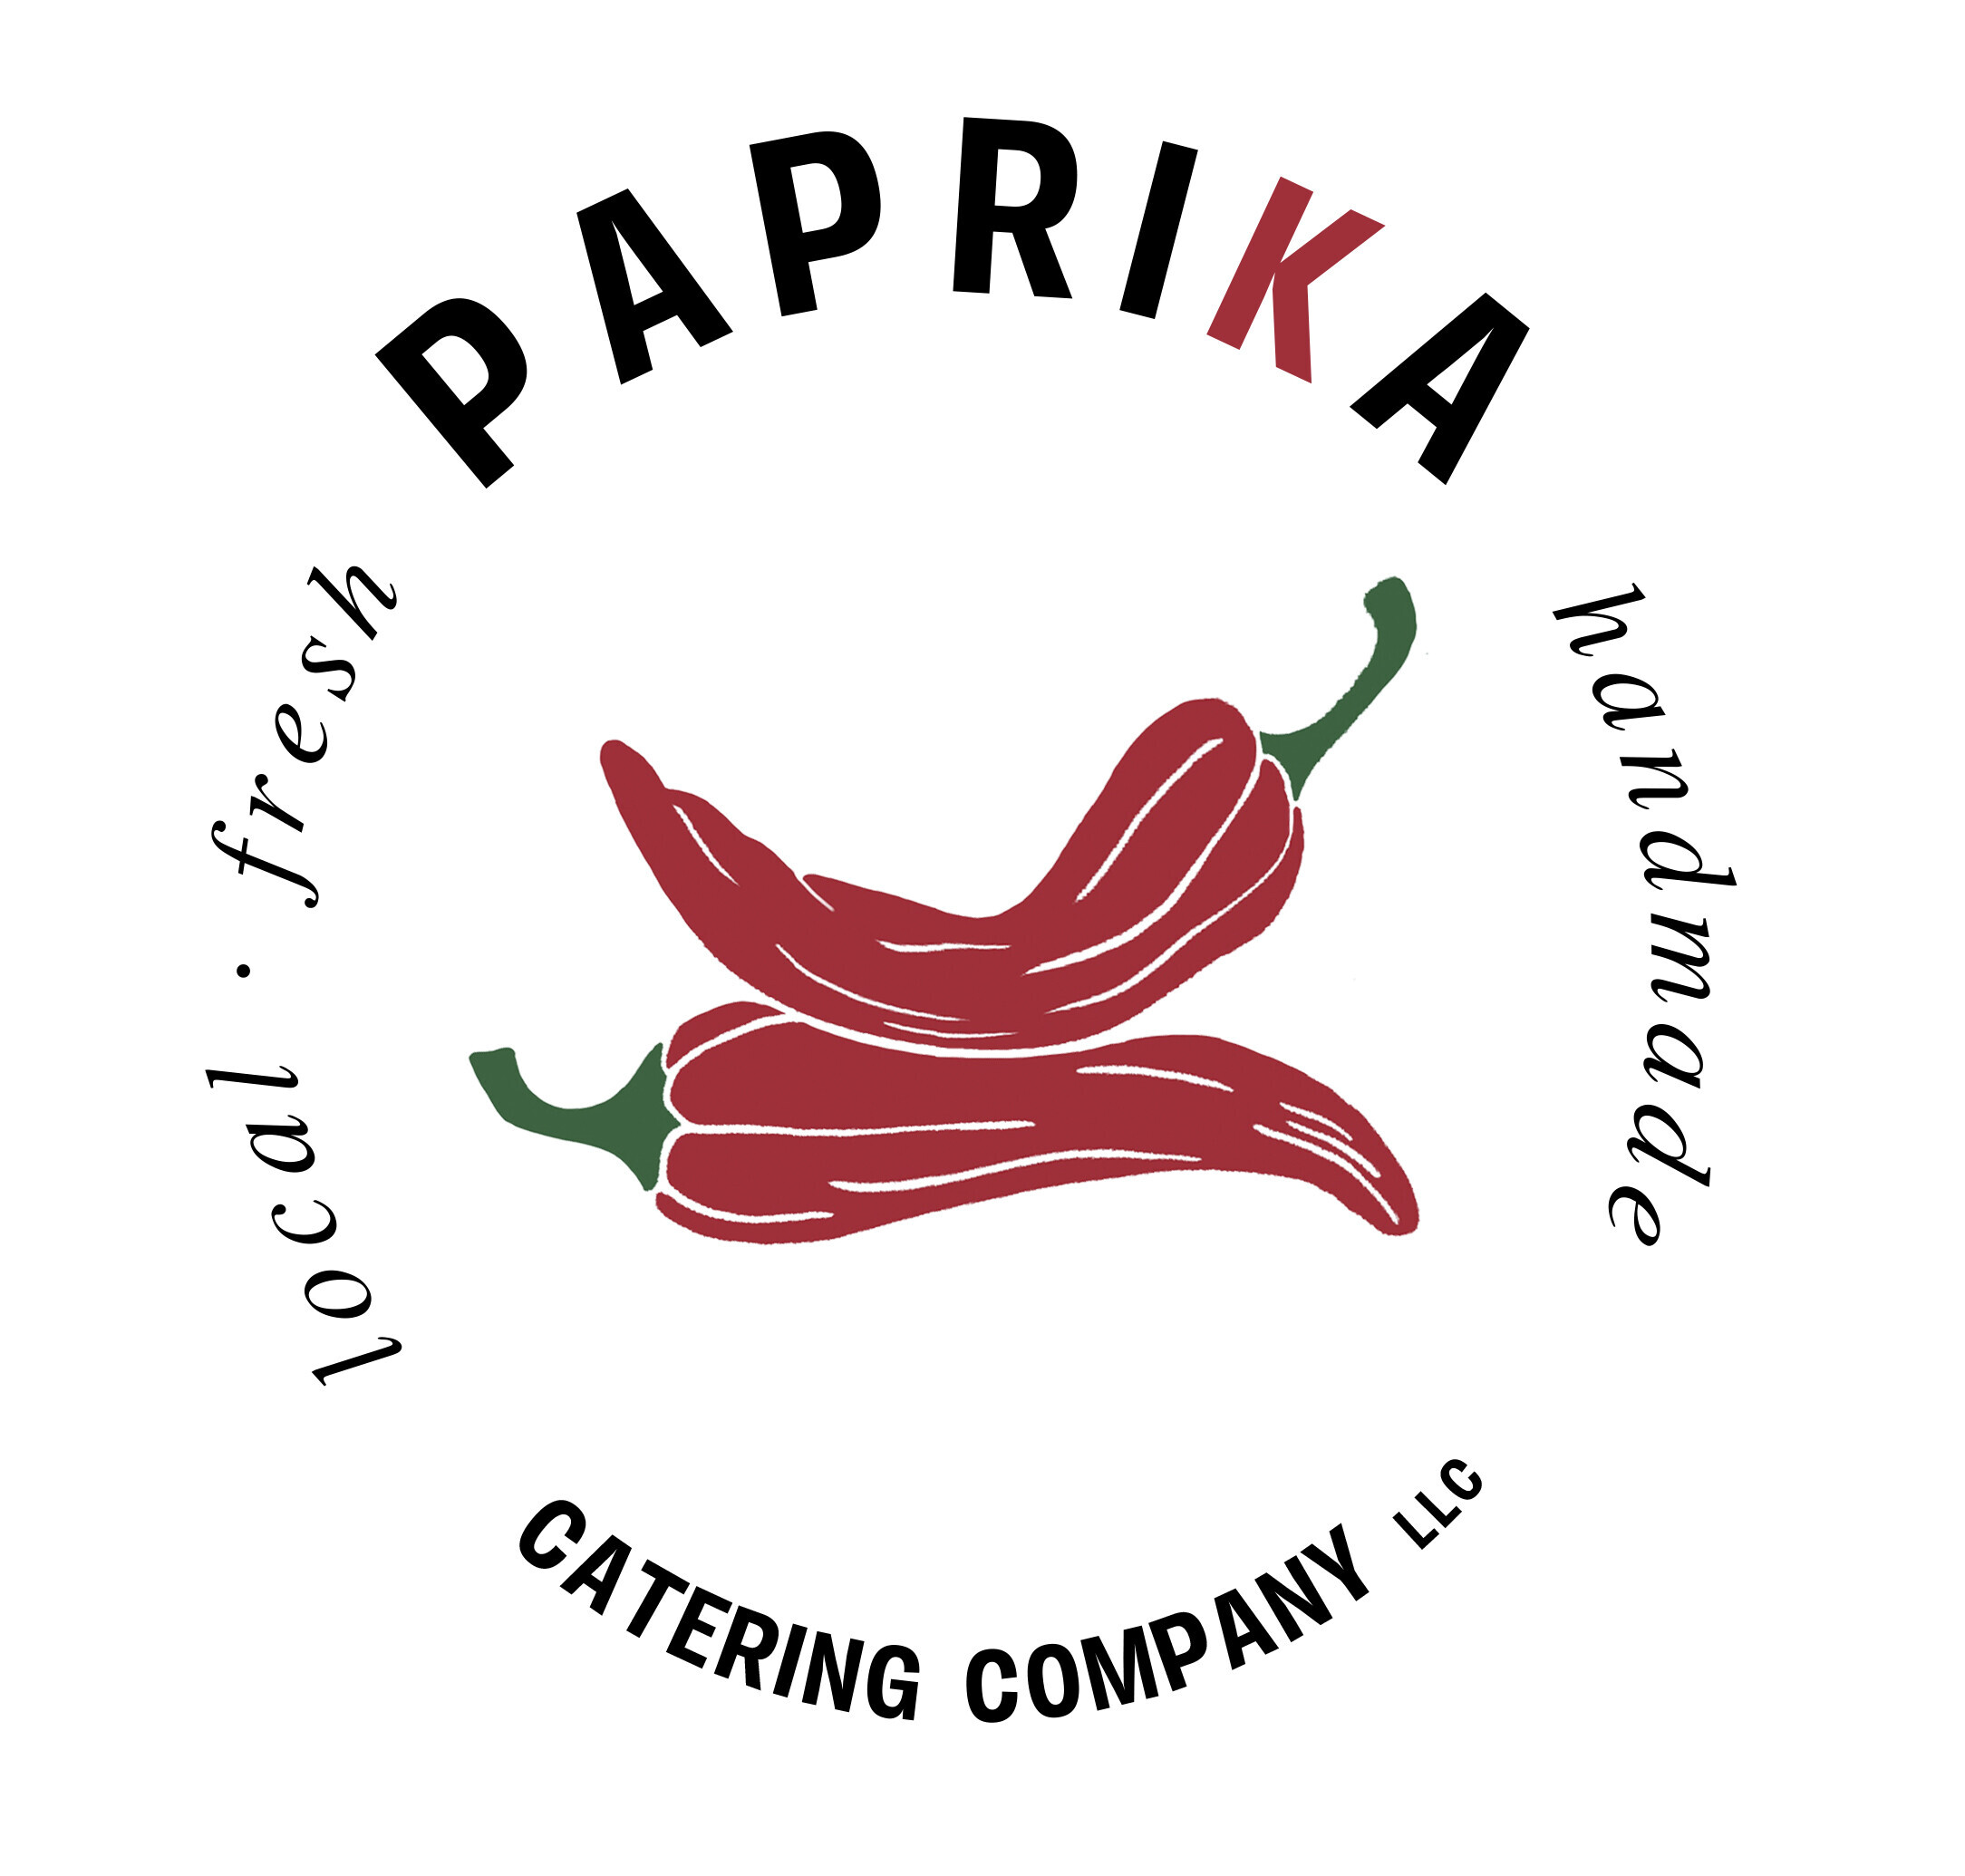 Paprika Catering Company